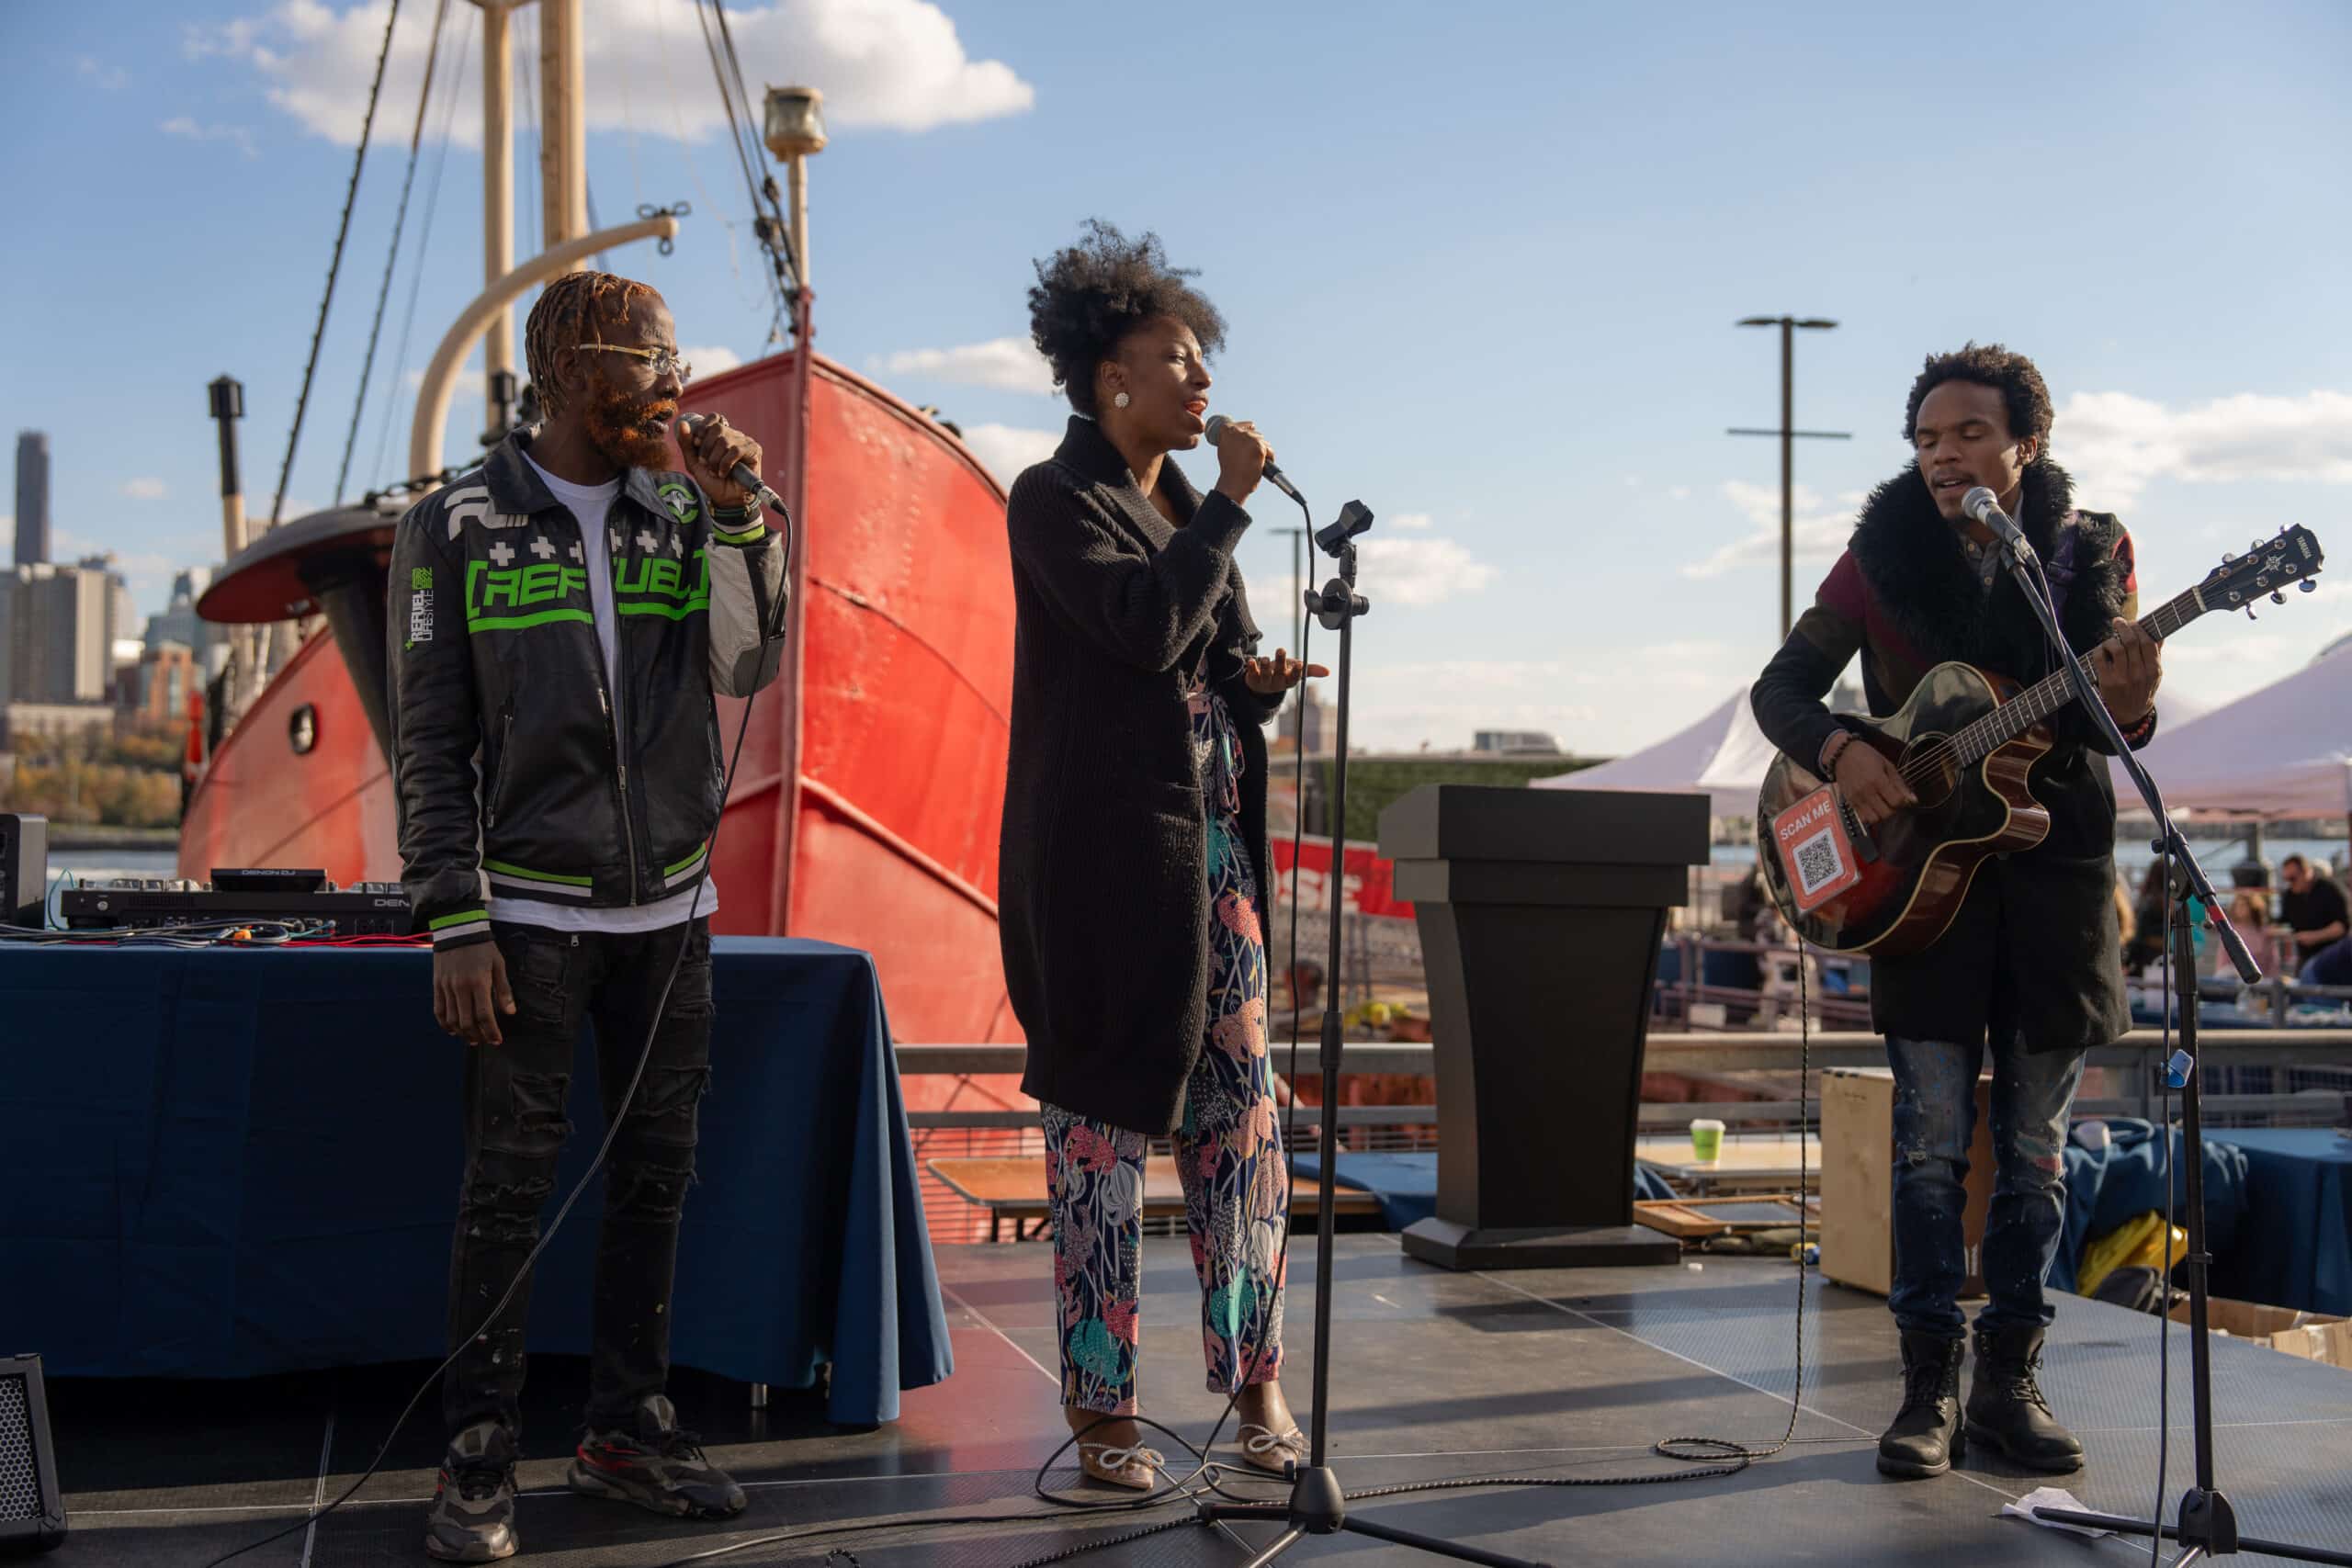 Performances at Taste of the Seaport